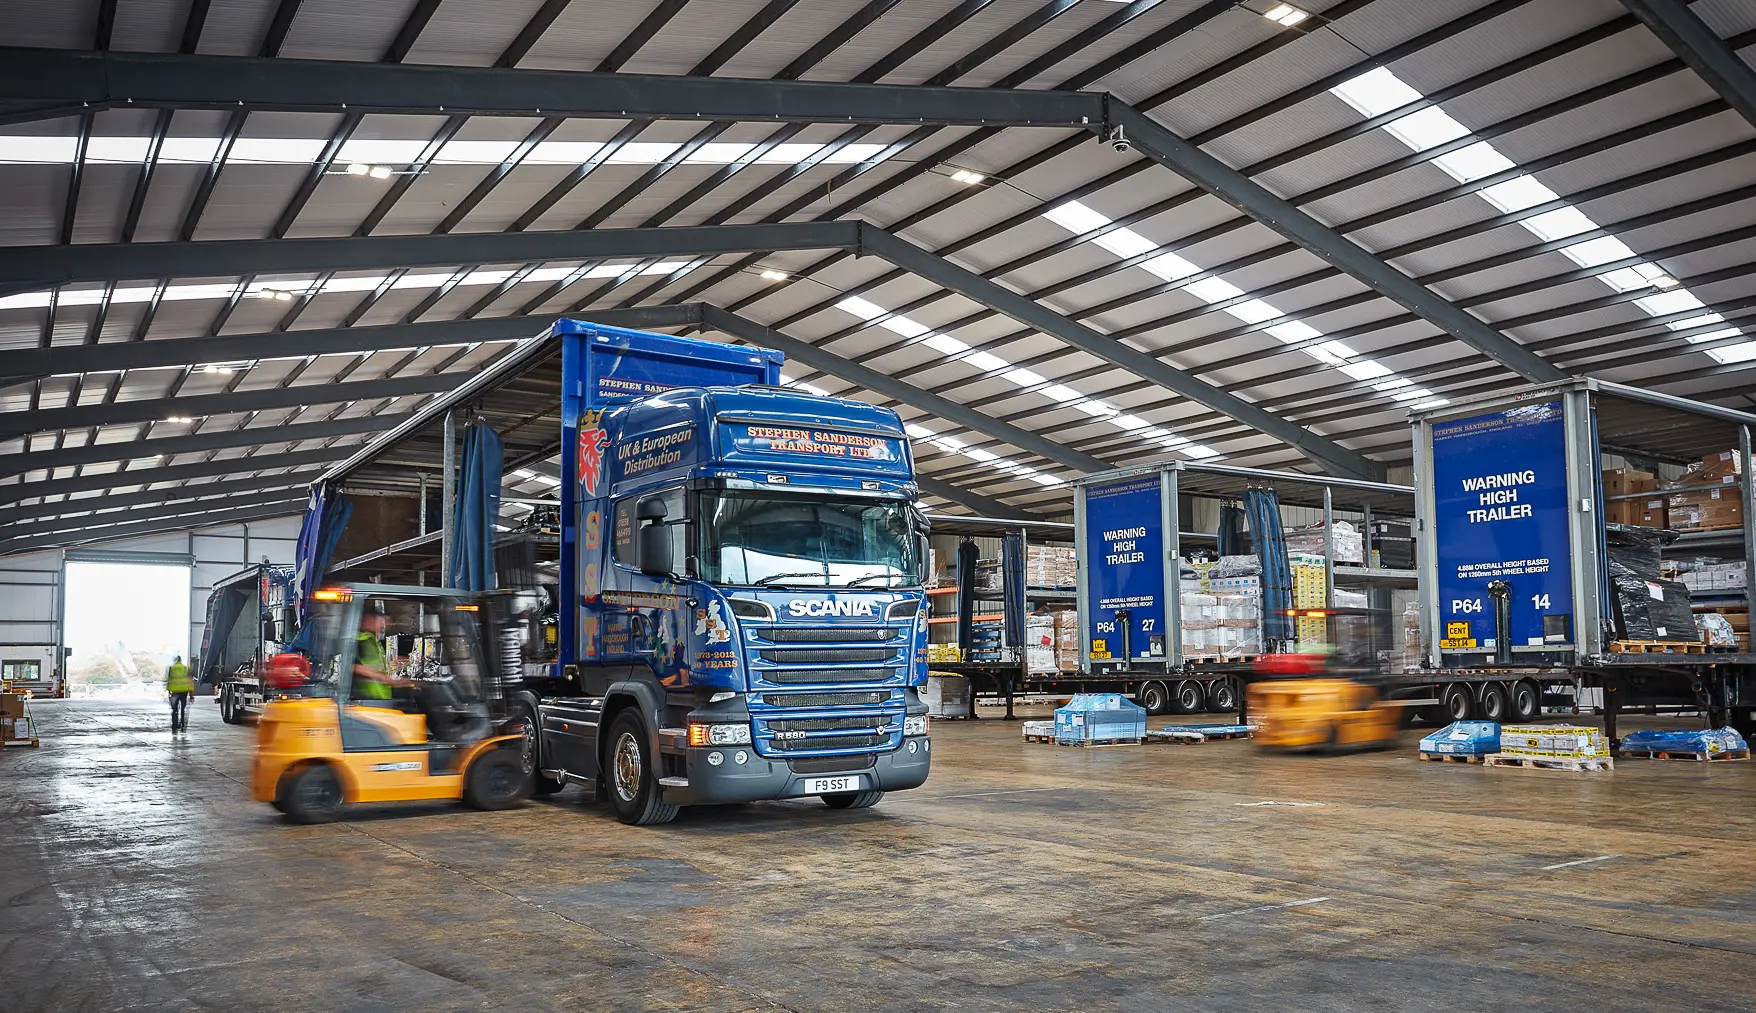 General haulage and palletline transport operations move to corby